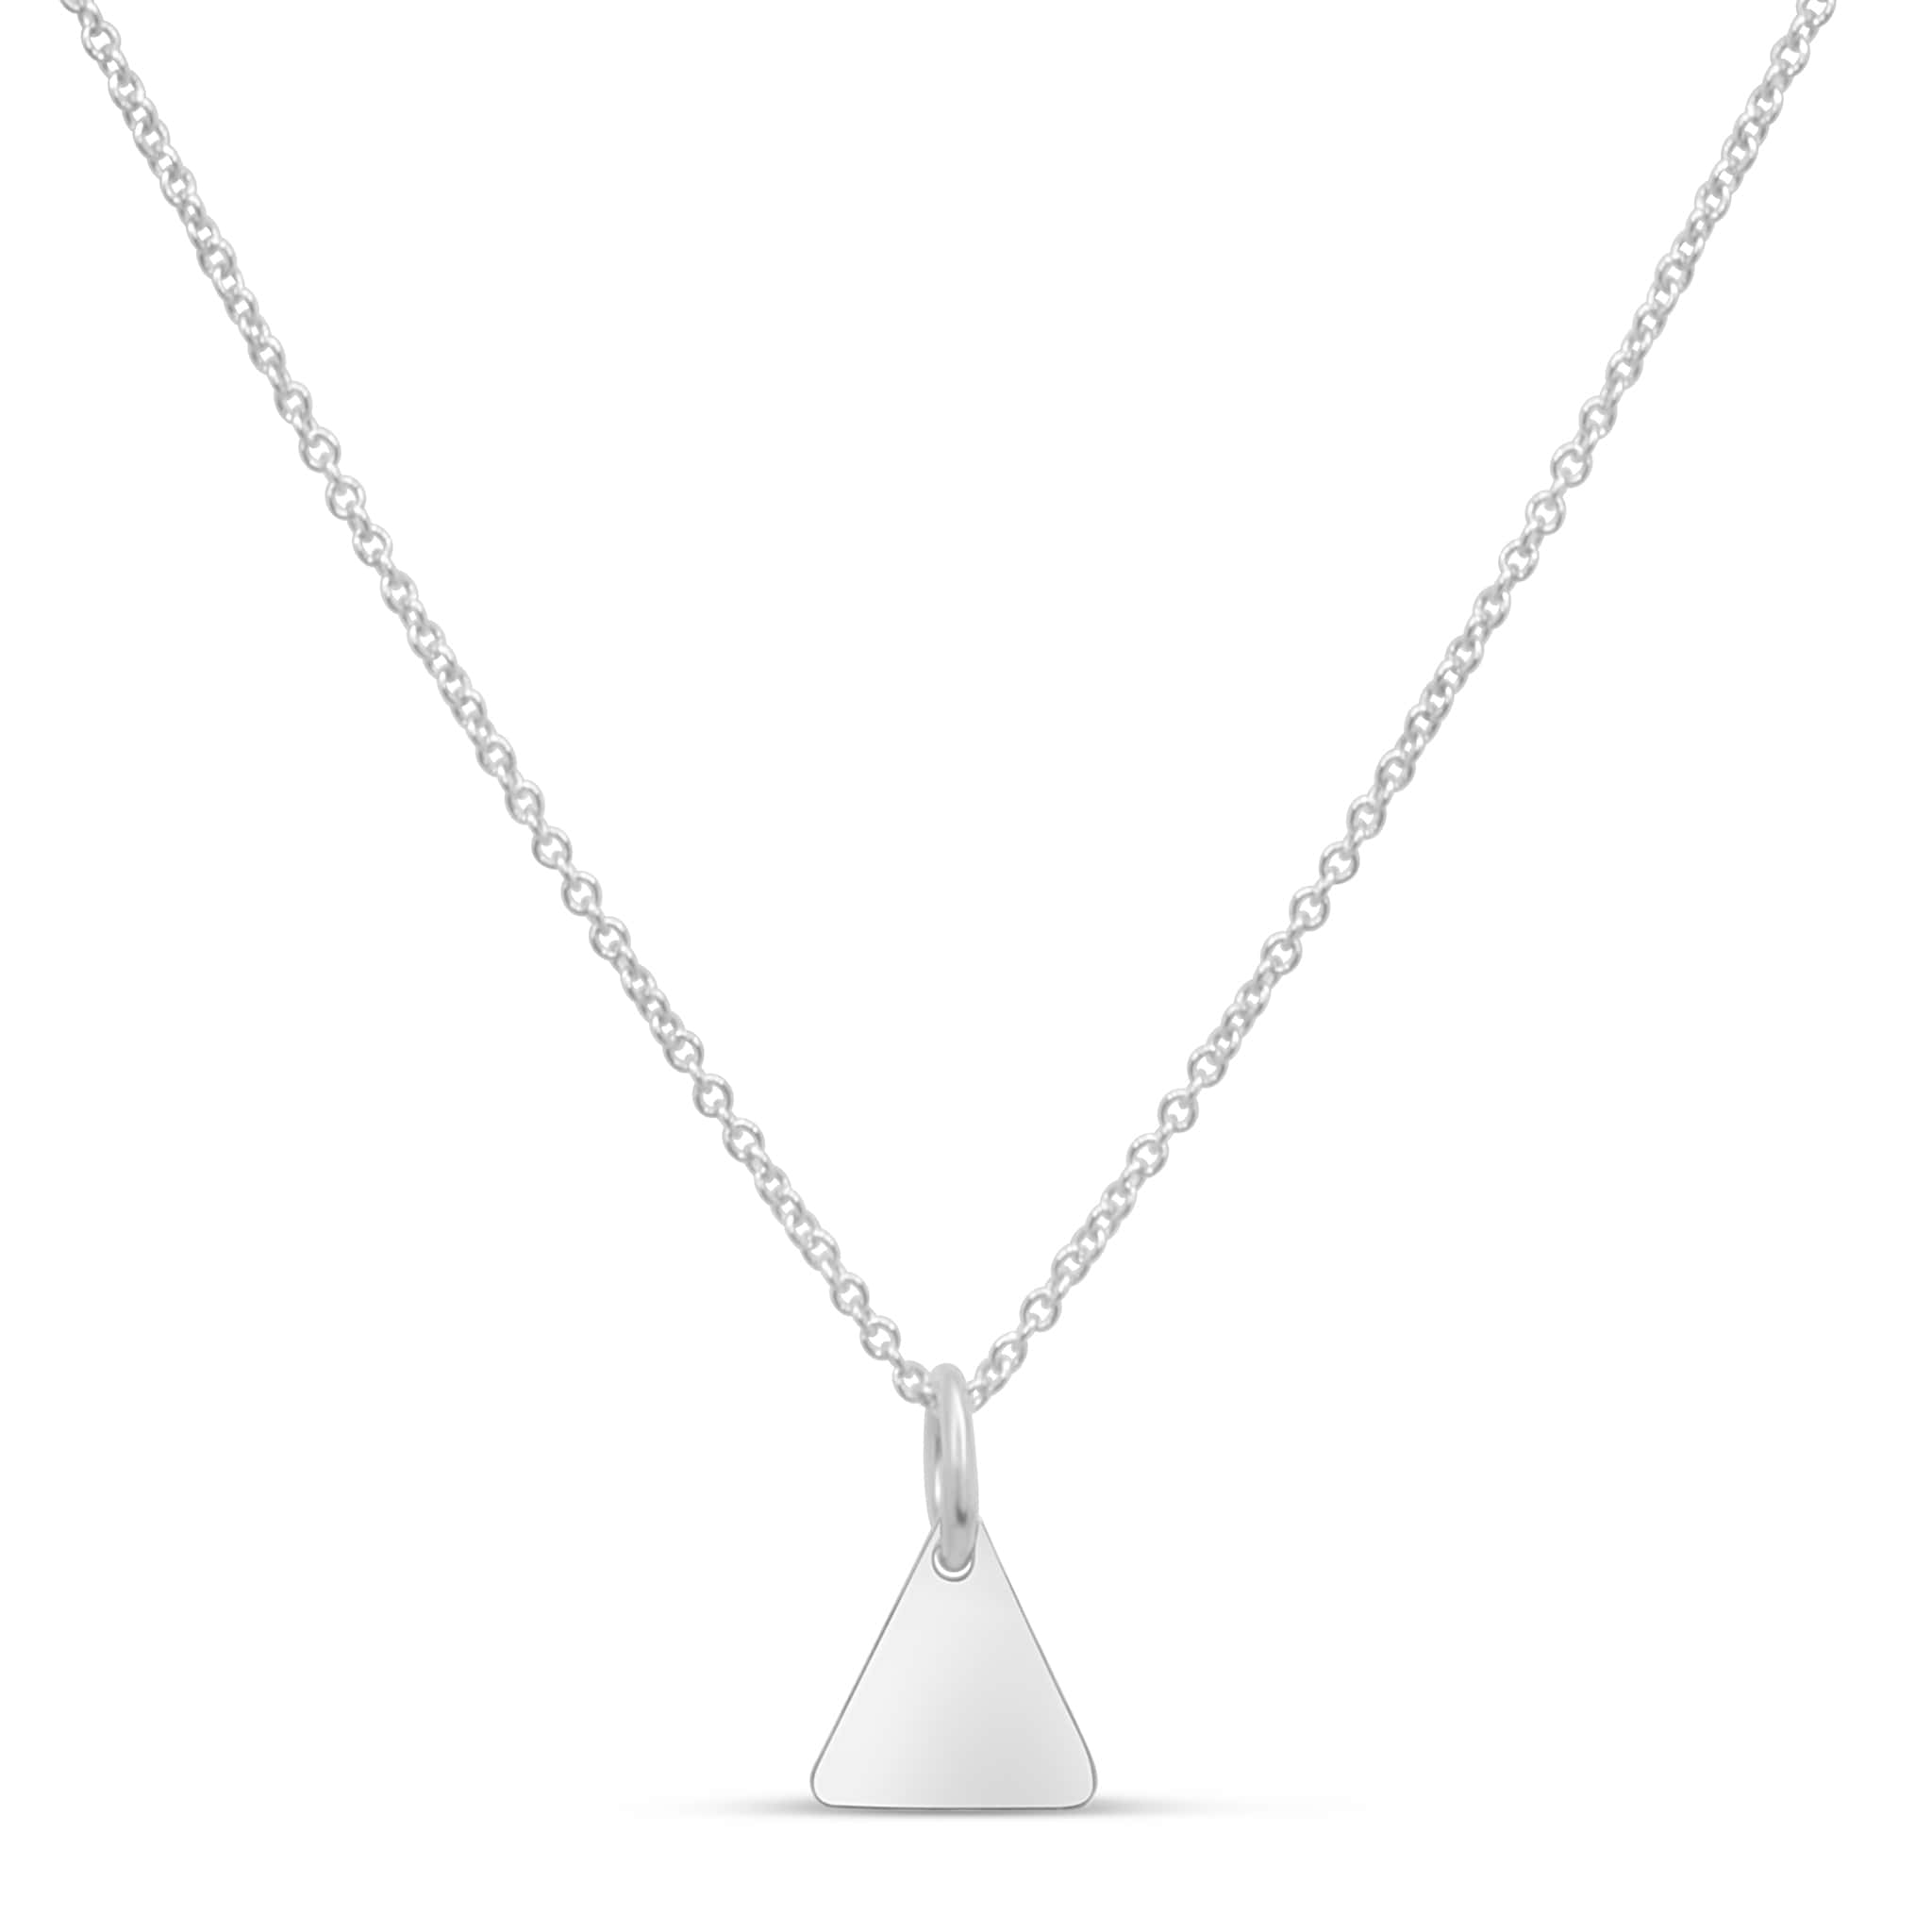 Sterling silver necklace with triangular pendant